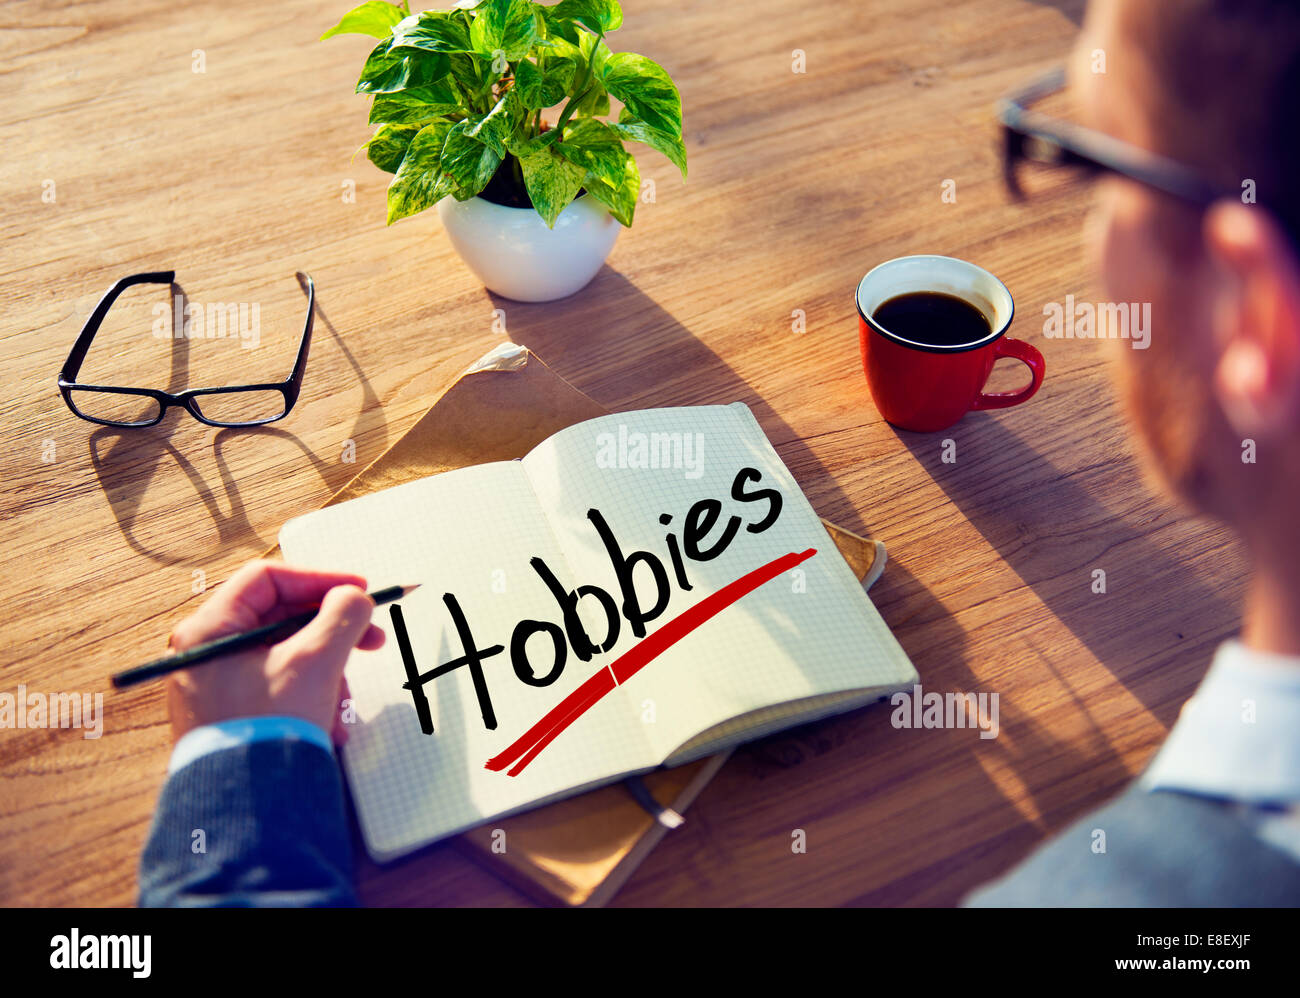 A Man Brainstorming about Hobbies Concept Stock Photo